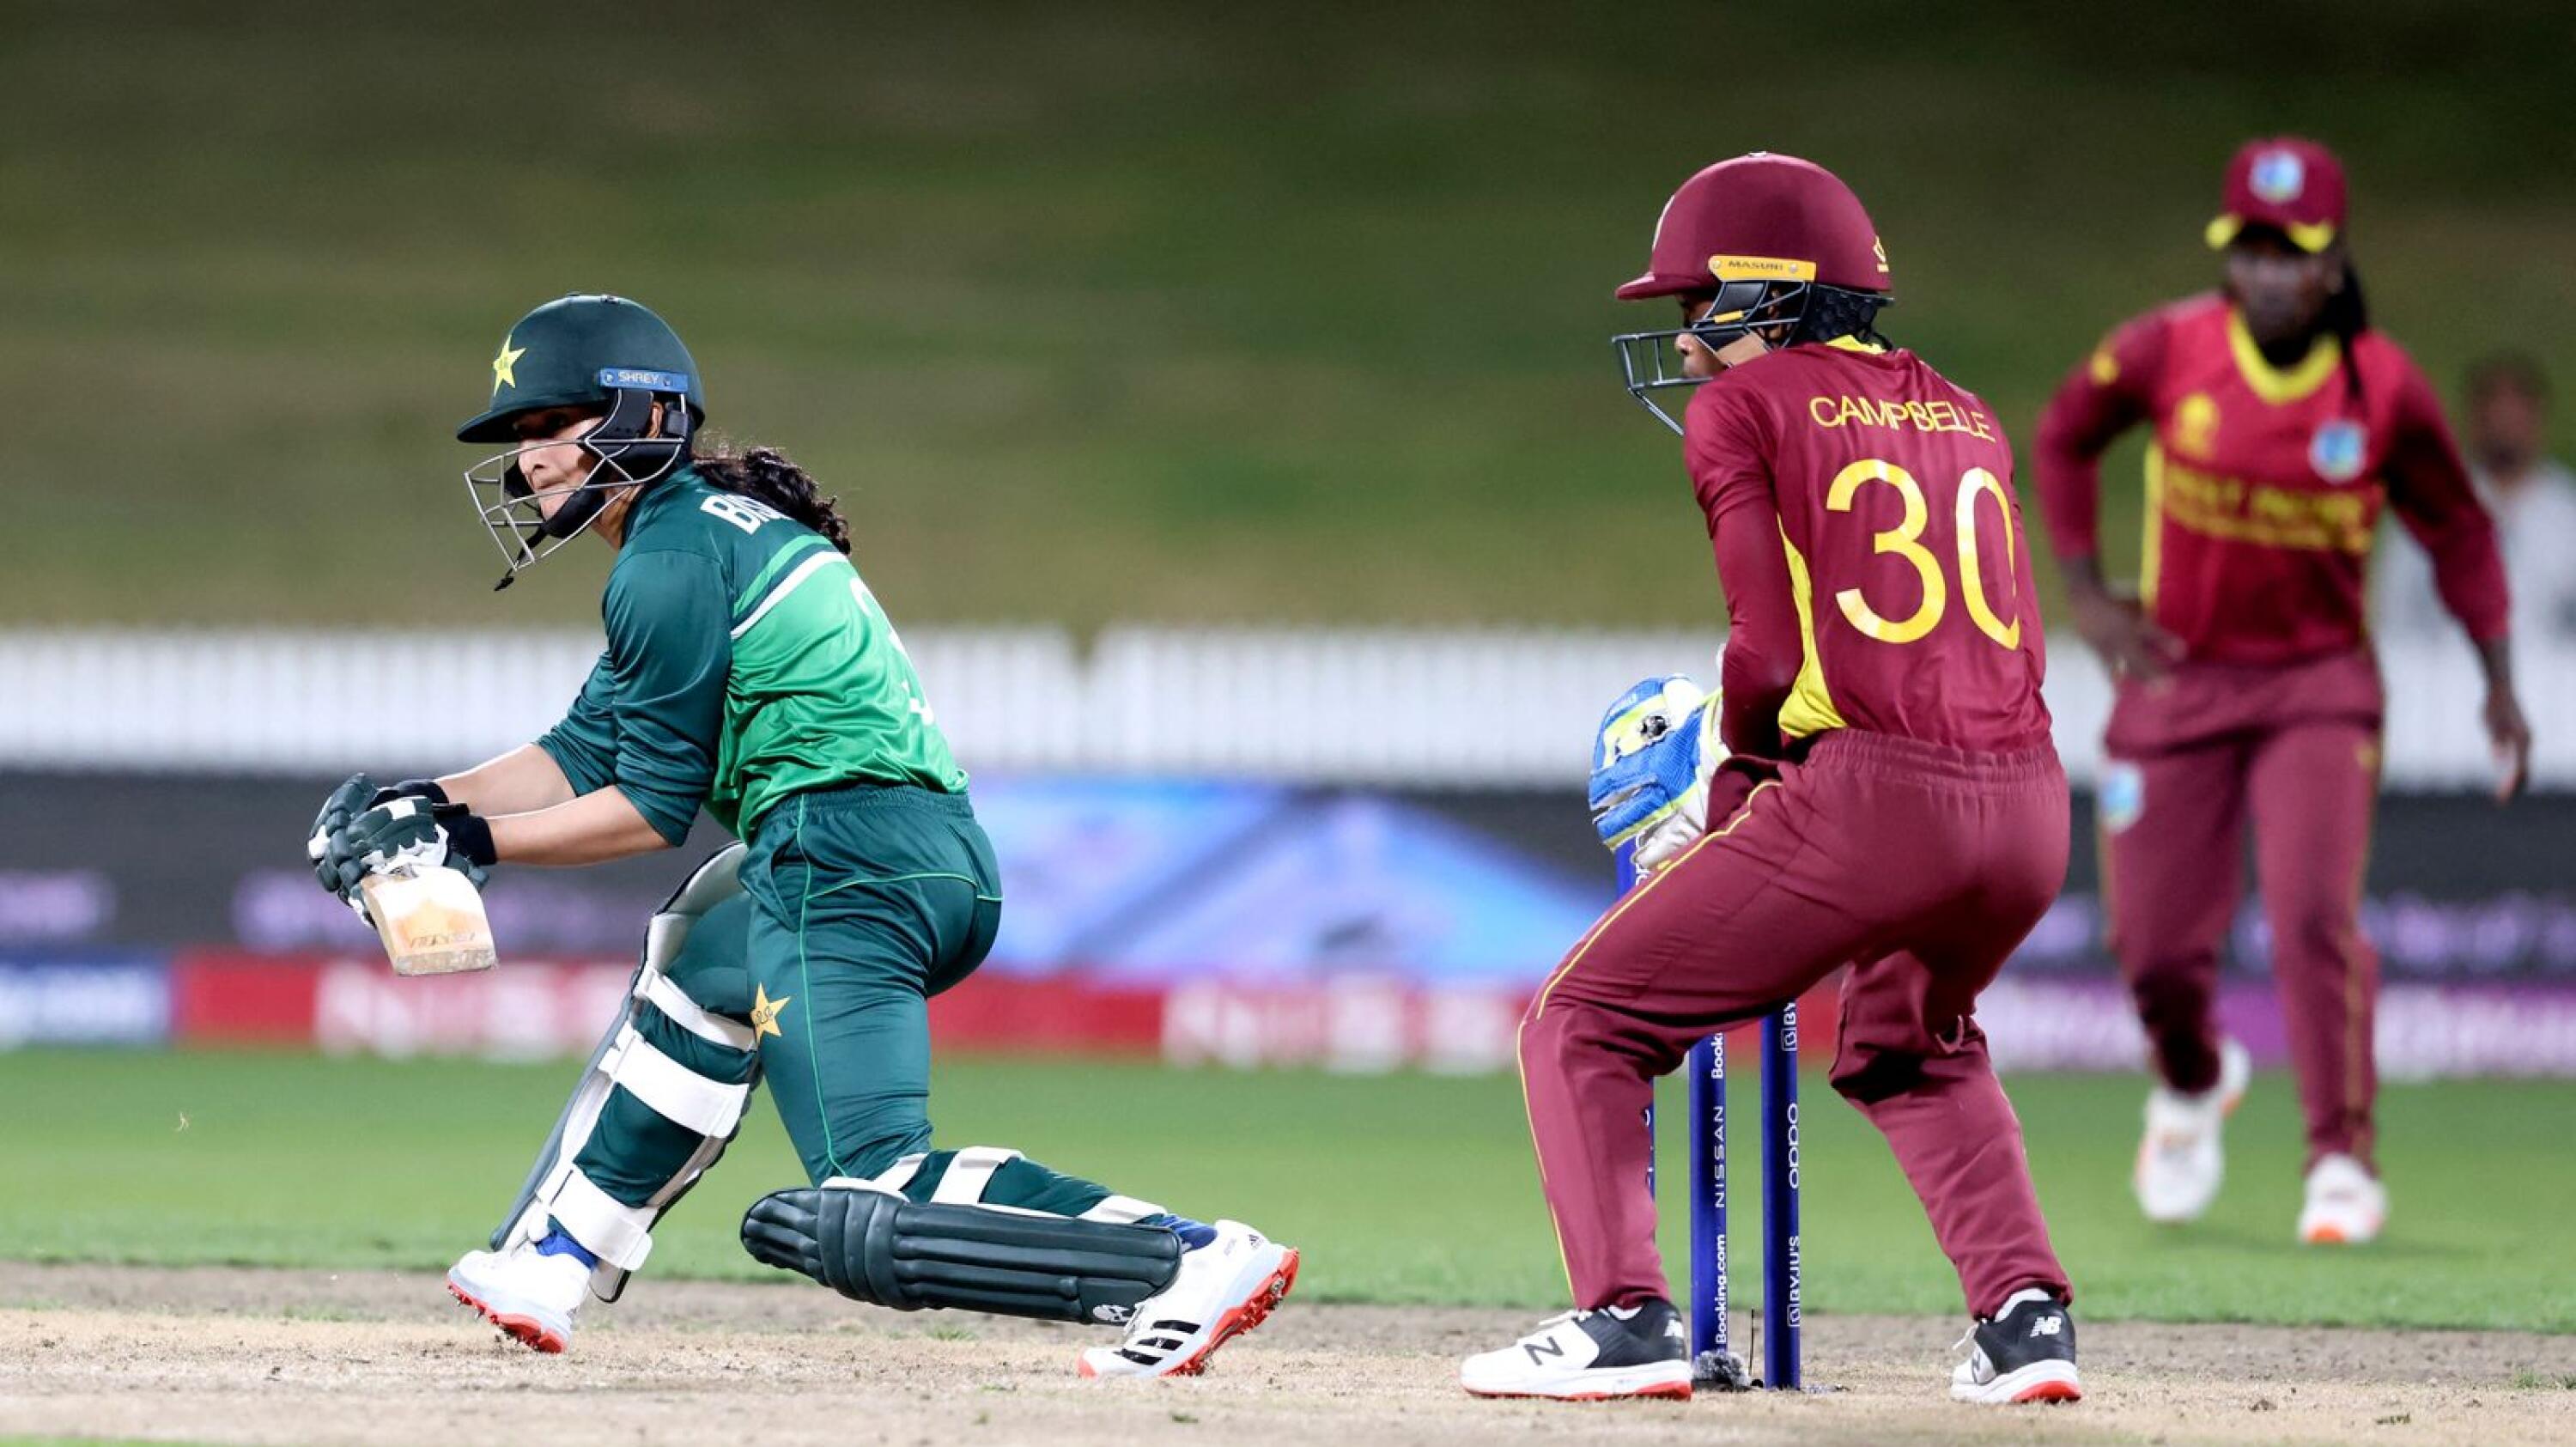 Pakistan's Bismah Maroof plays a shot during their Women's Cricket World Cup match against West Indies at Seddon Park in Hamilton on Monday